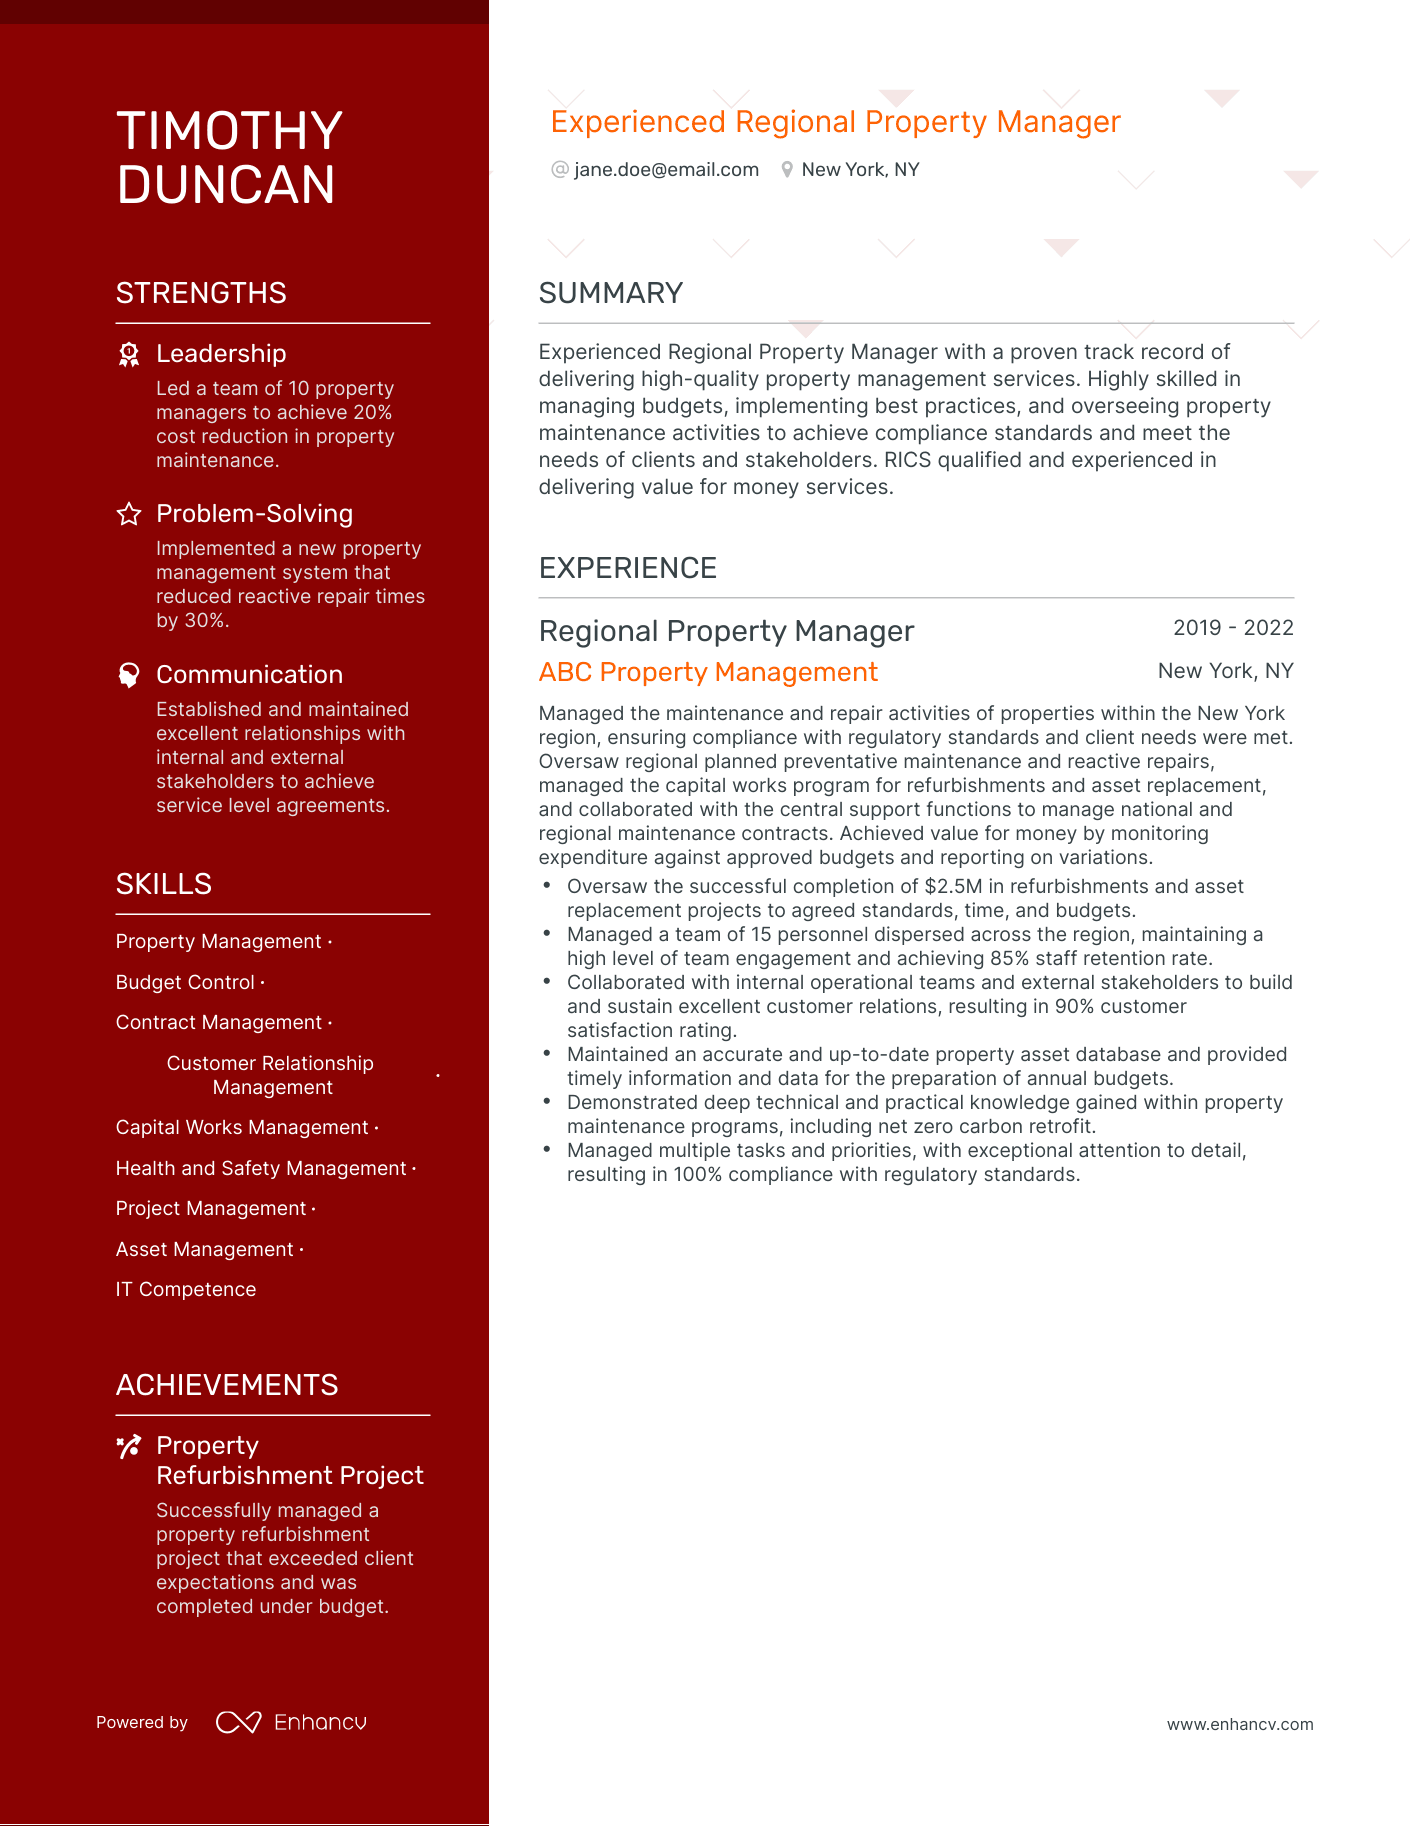 Polished Regional Property Manager Resume Template